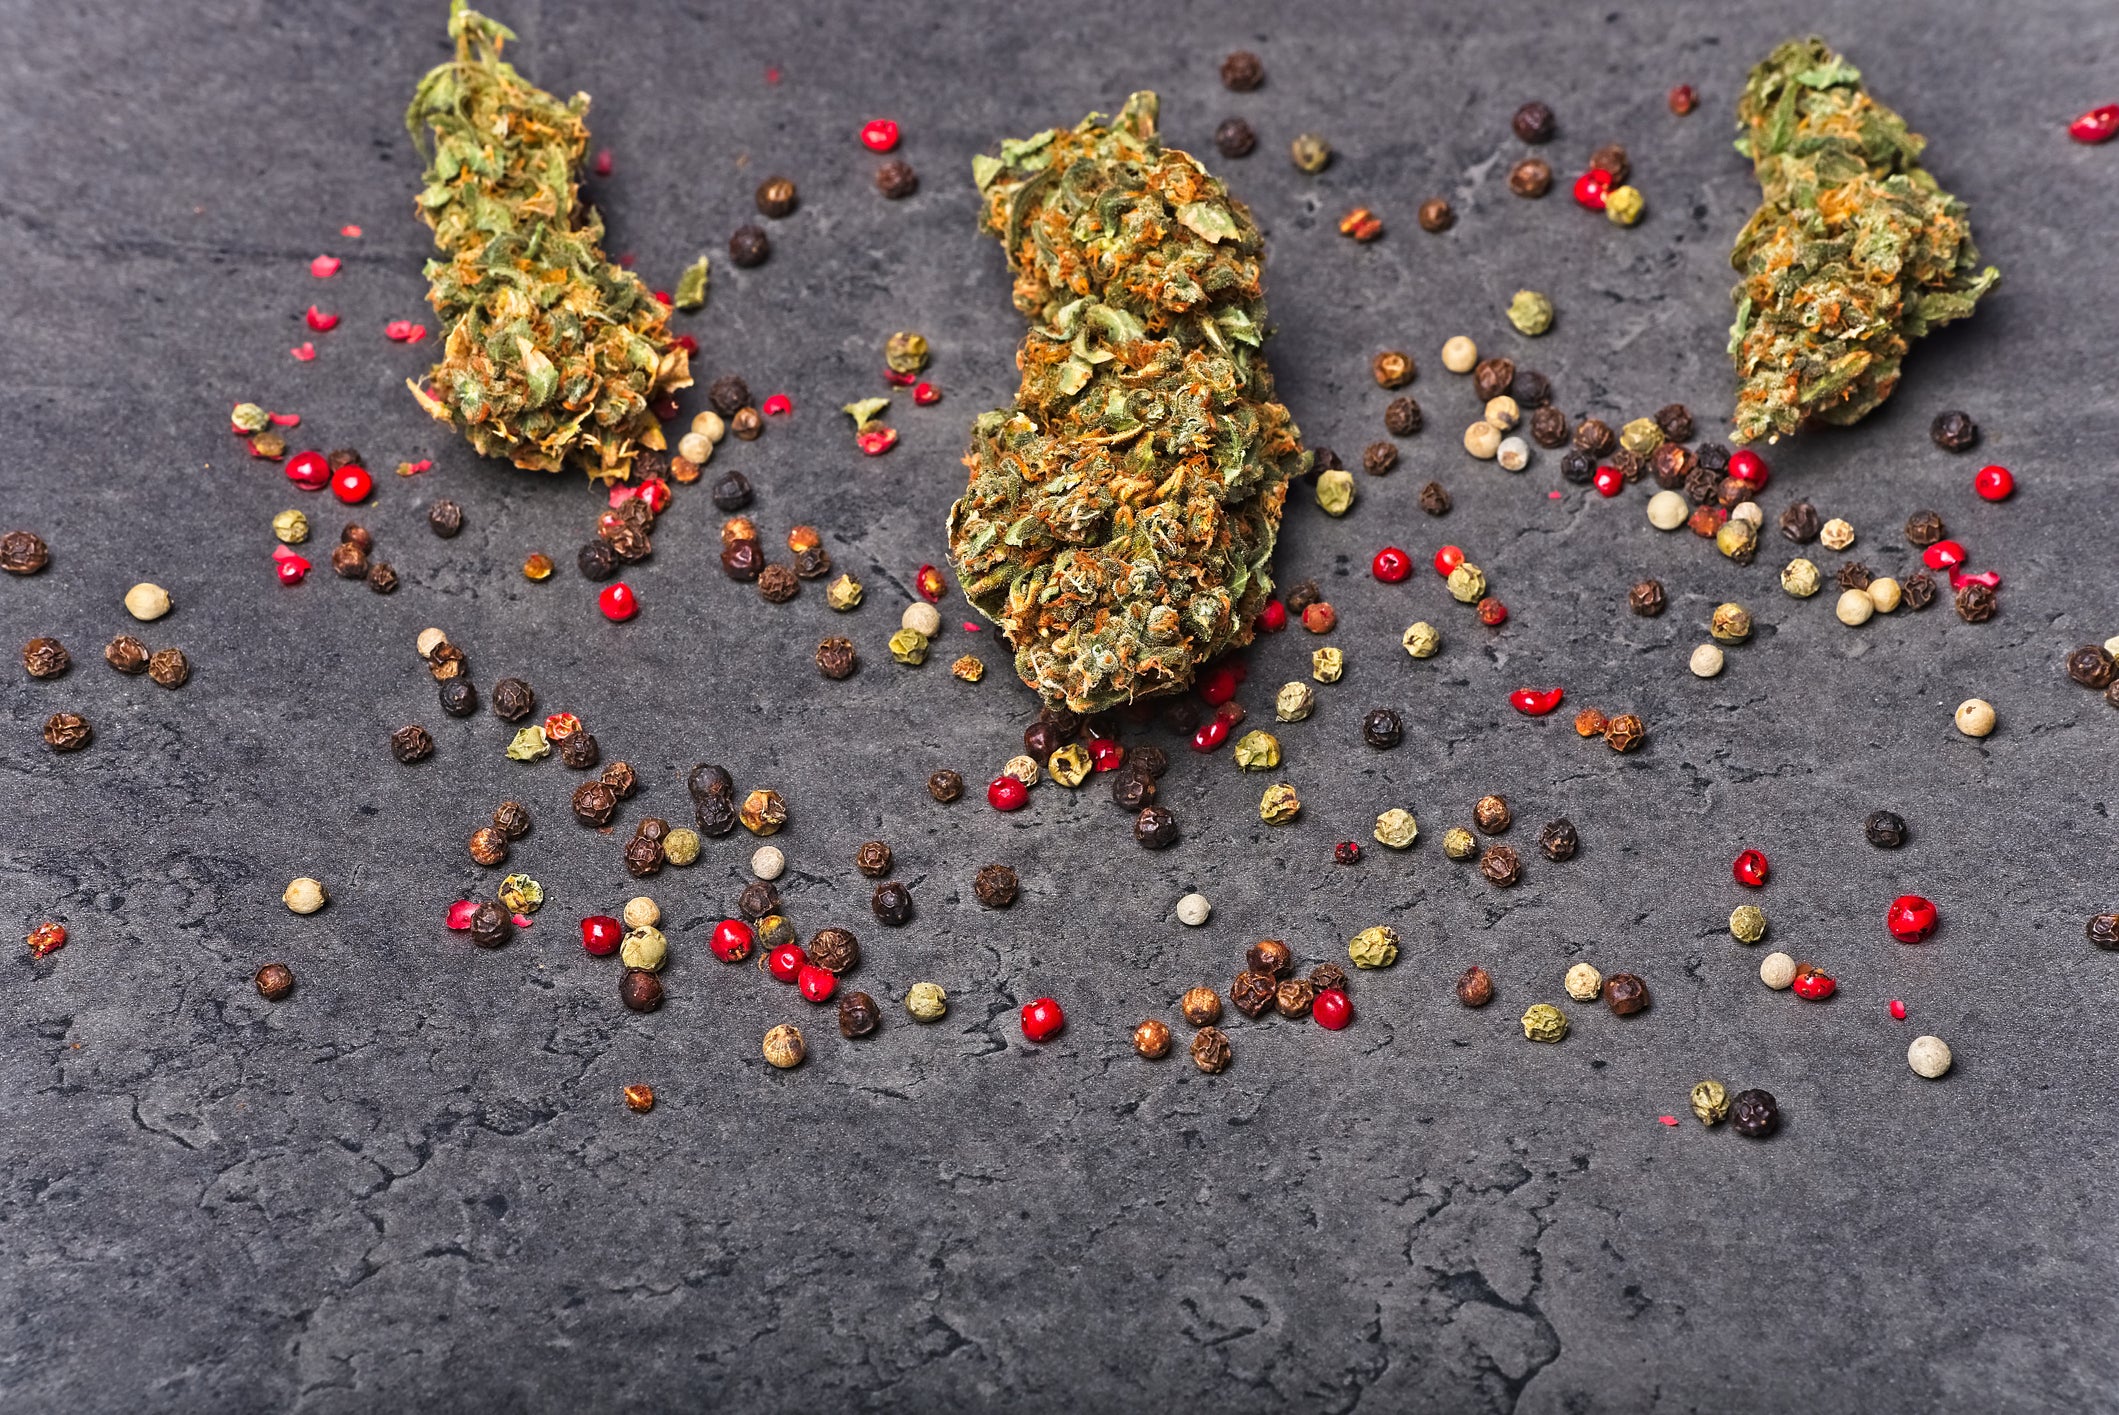 Peppercorns with the beta-caryophyllene terpene are next to cannabis flower buds with a similar flavor.